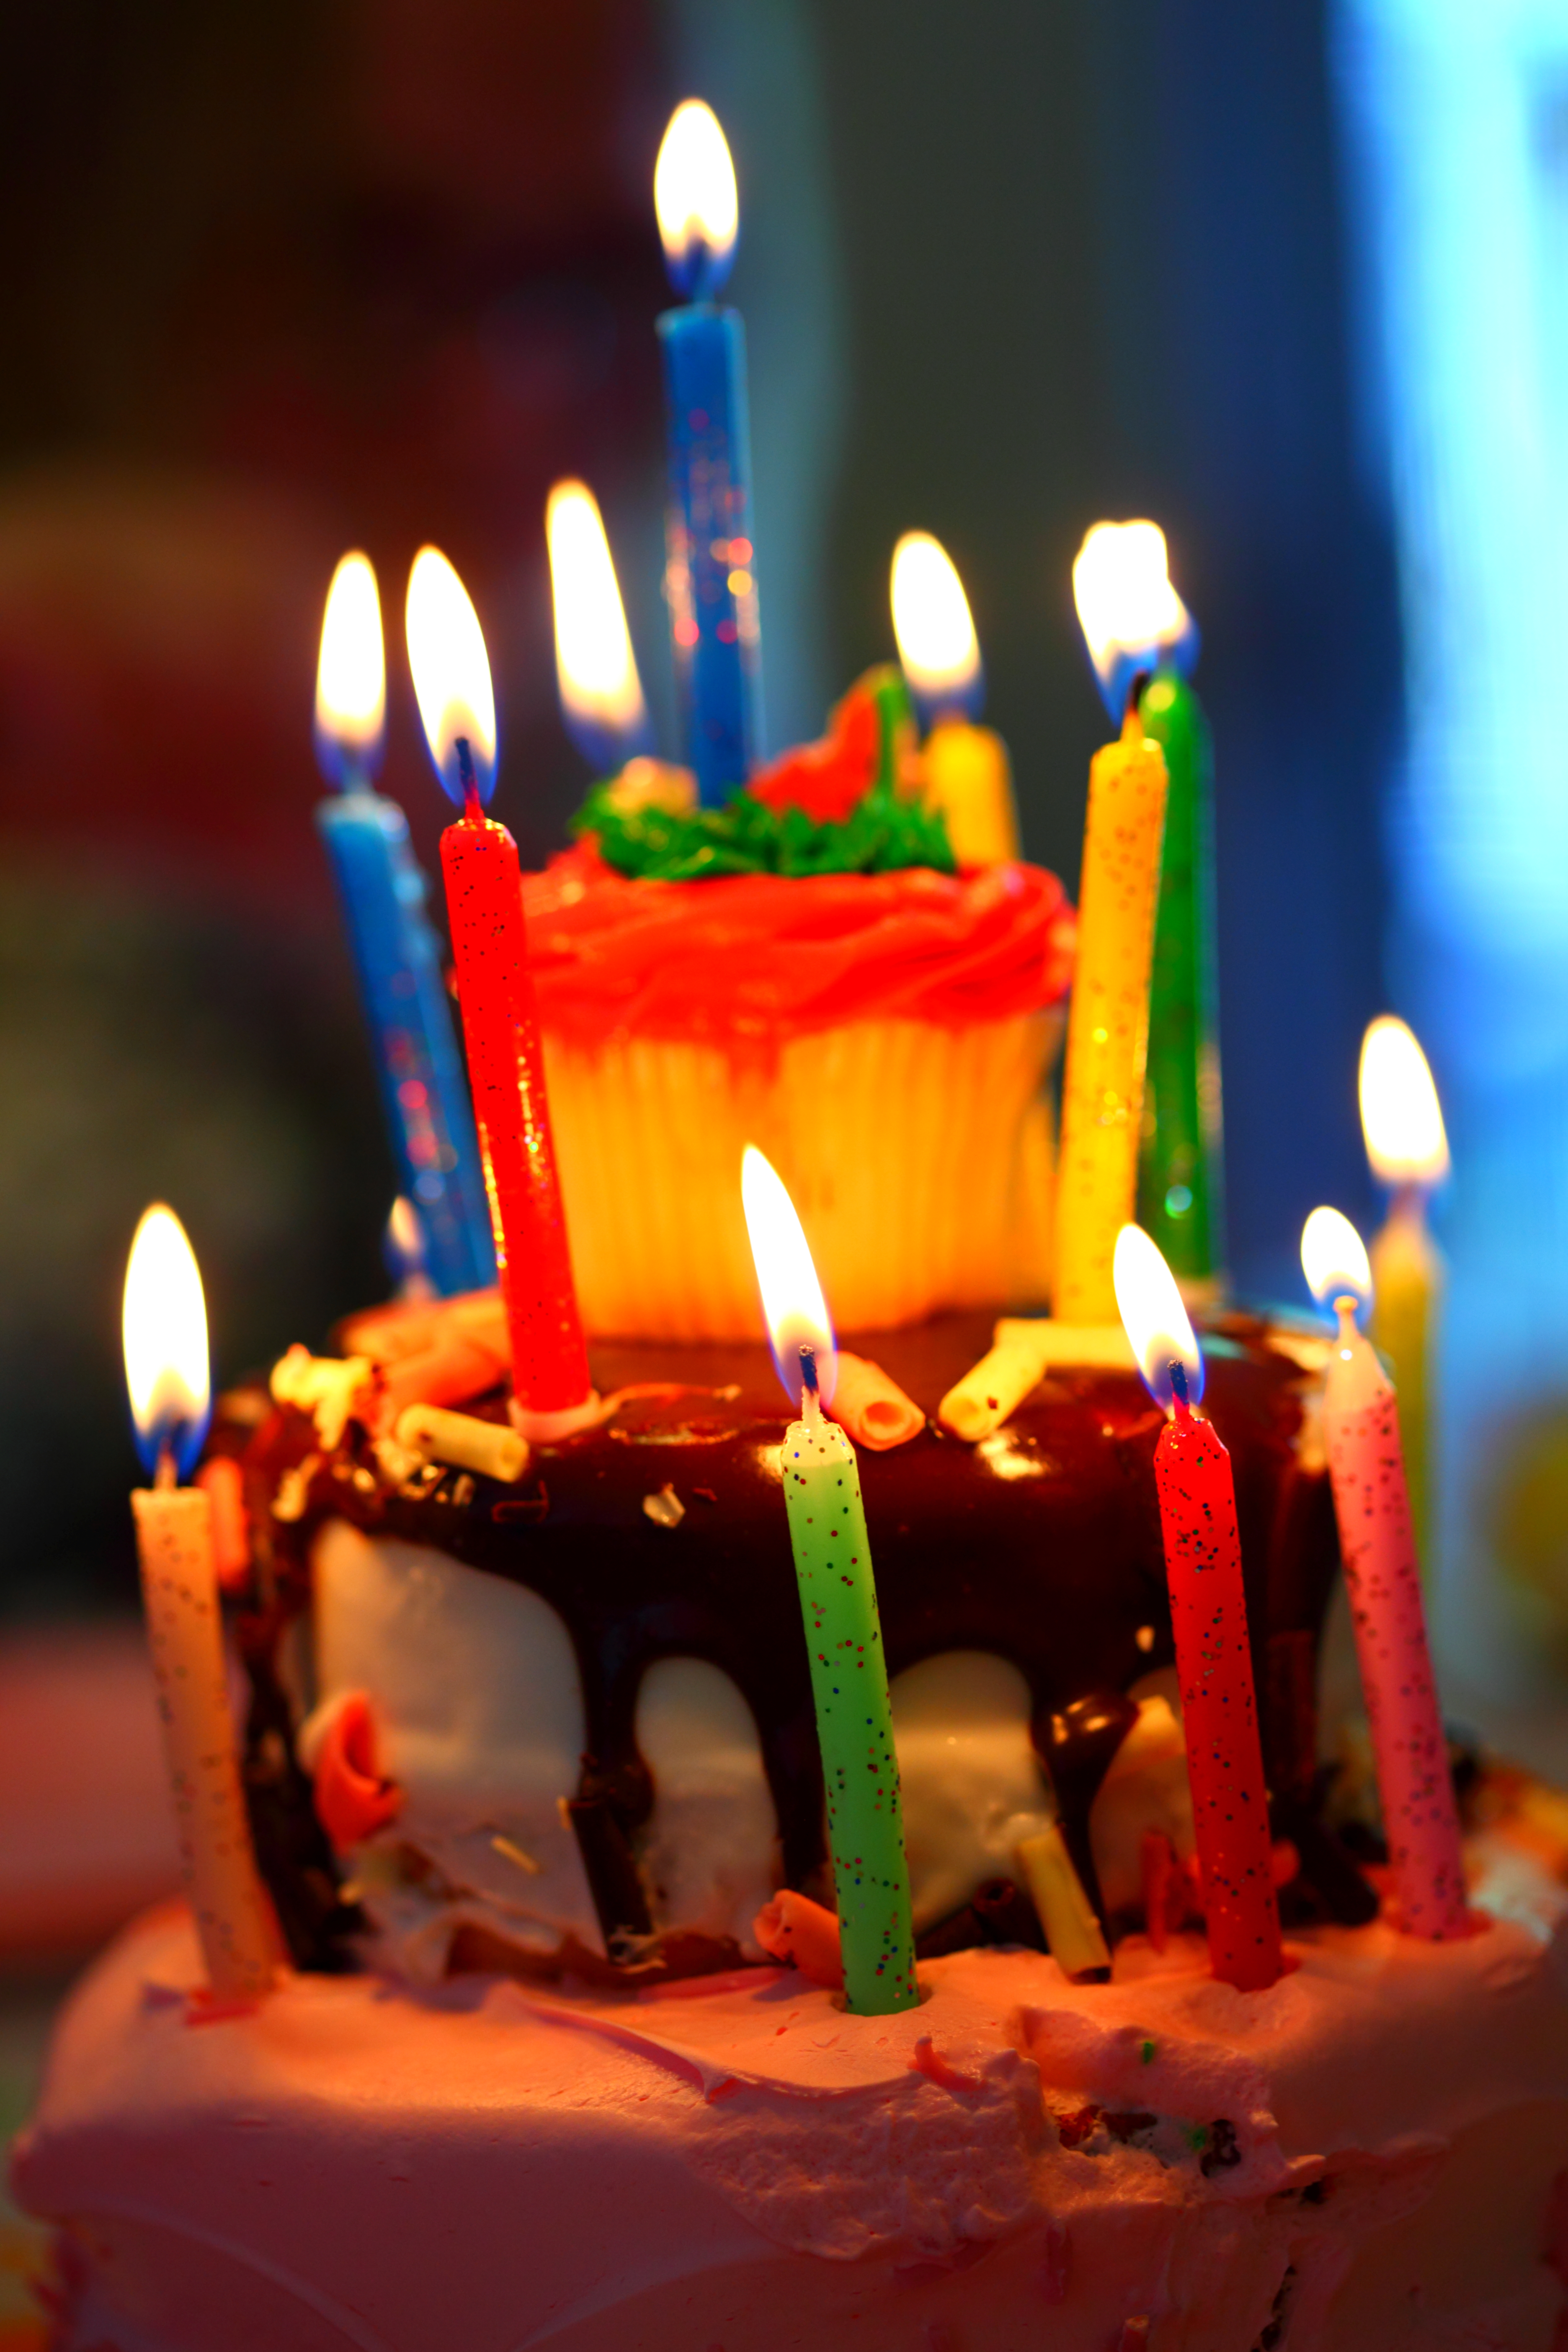 FileCreative Commons Birthday Cake and Candles 4825652728jpg